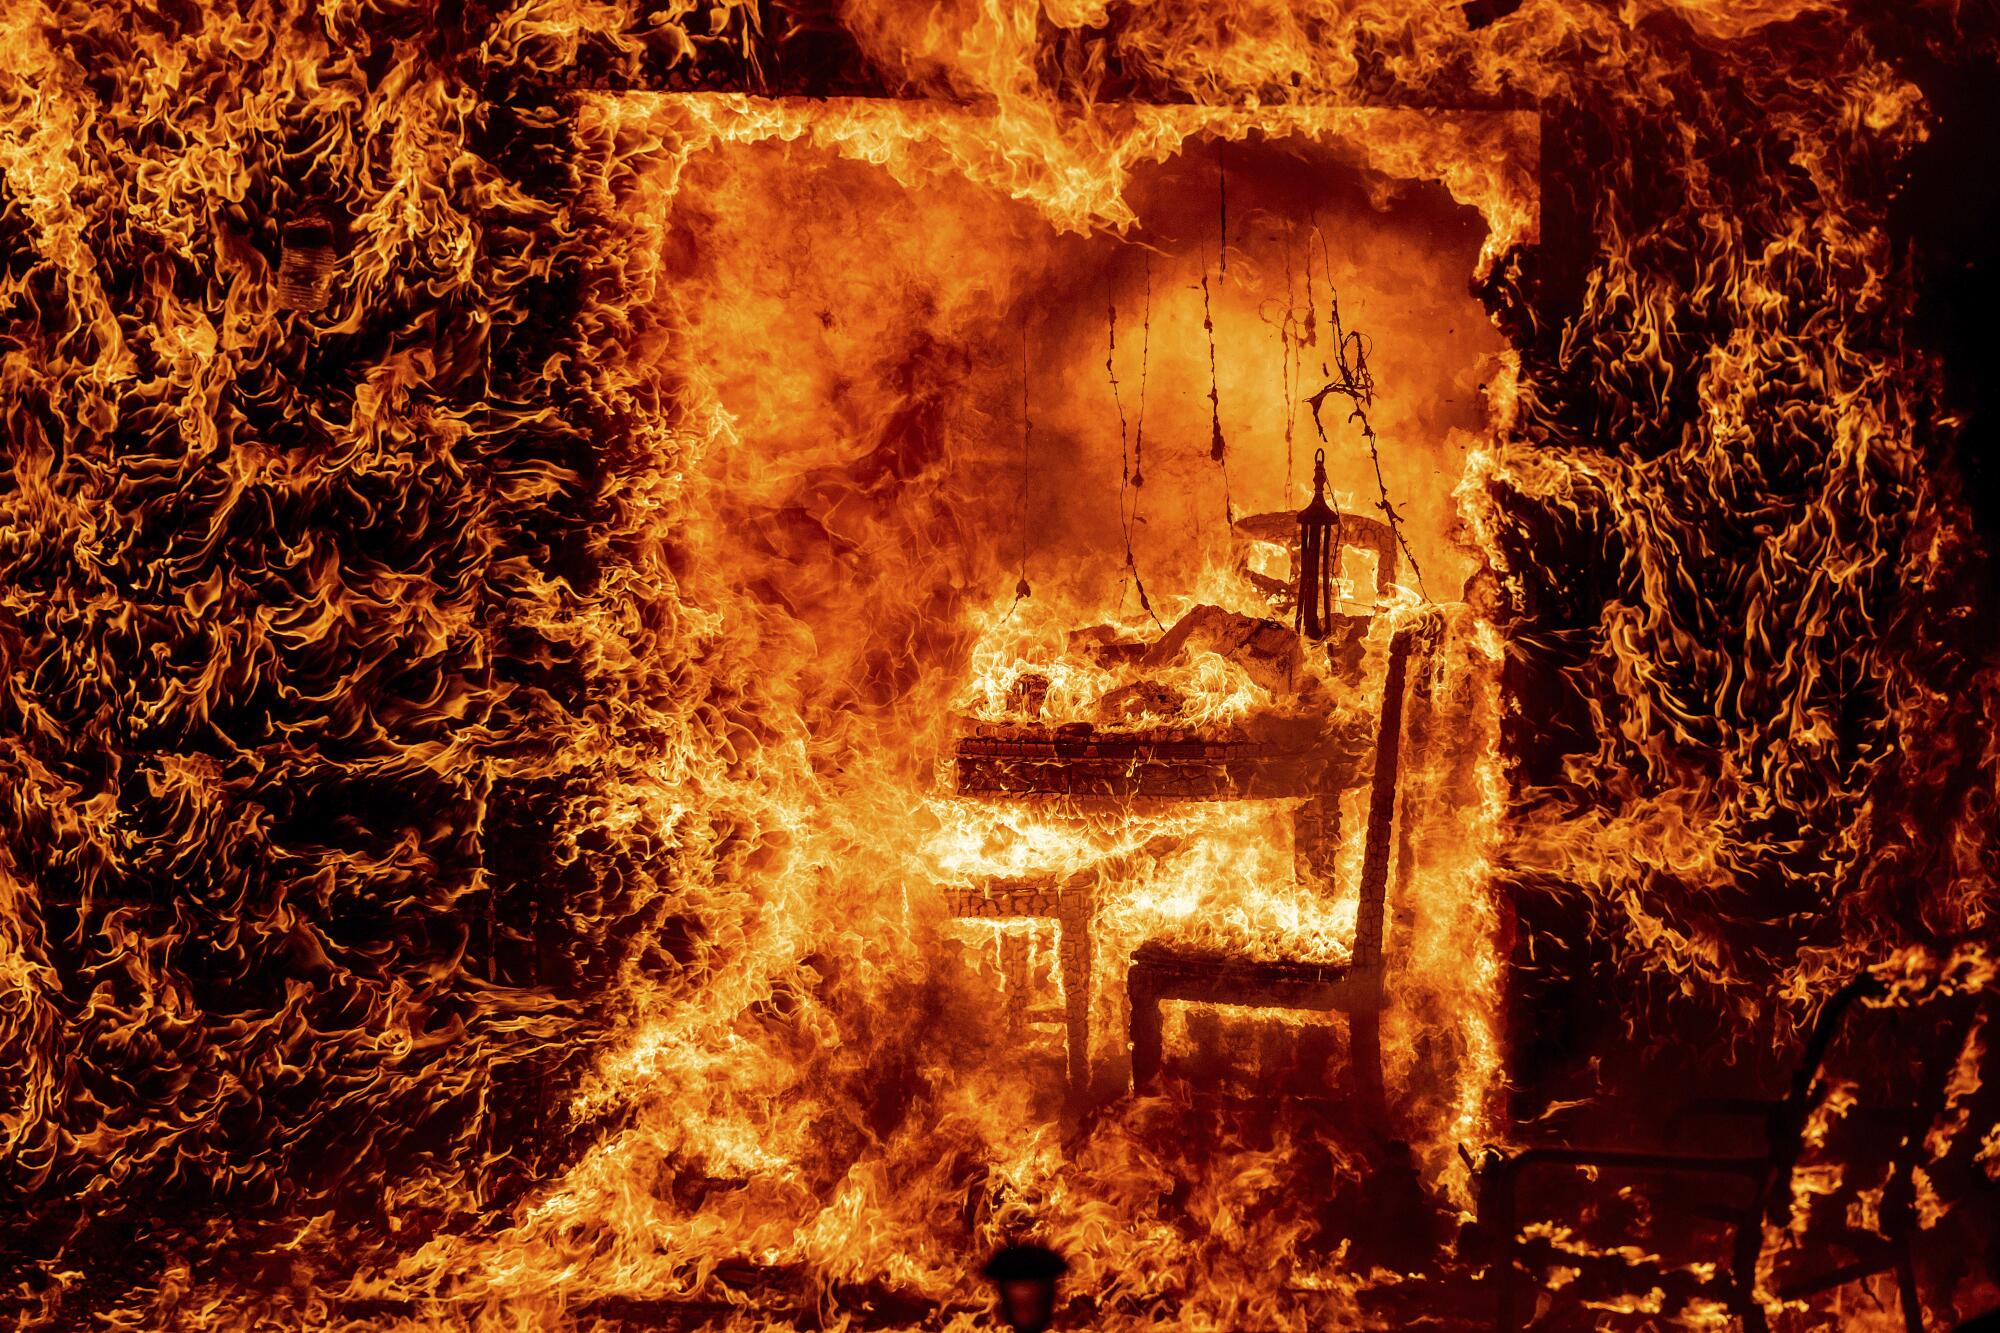 Flames engulf a chair inside a burning home.